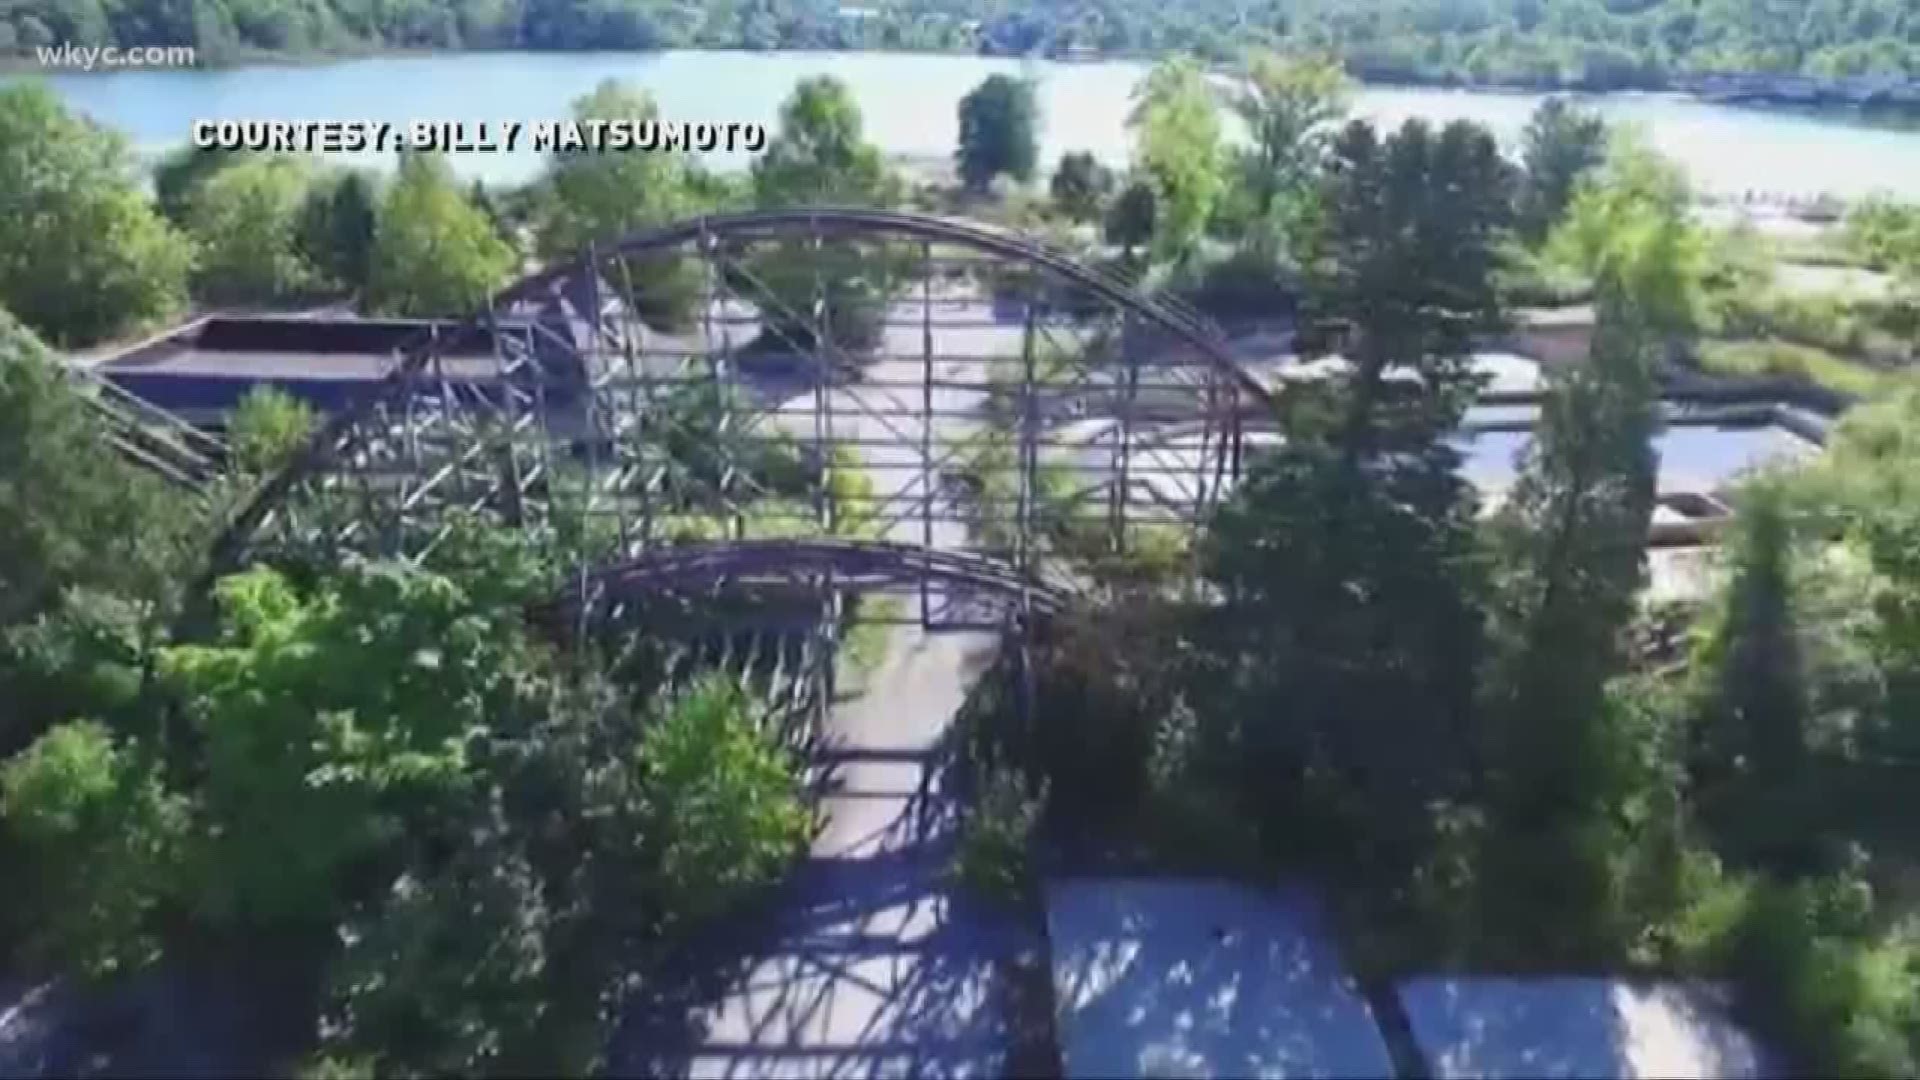 Pulte Group is proposing to build 321 homes and commercial and office spaces on the former sites of Geauga Lake and SeaWorld. Ray Strickland reports.